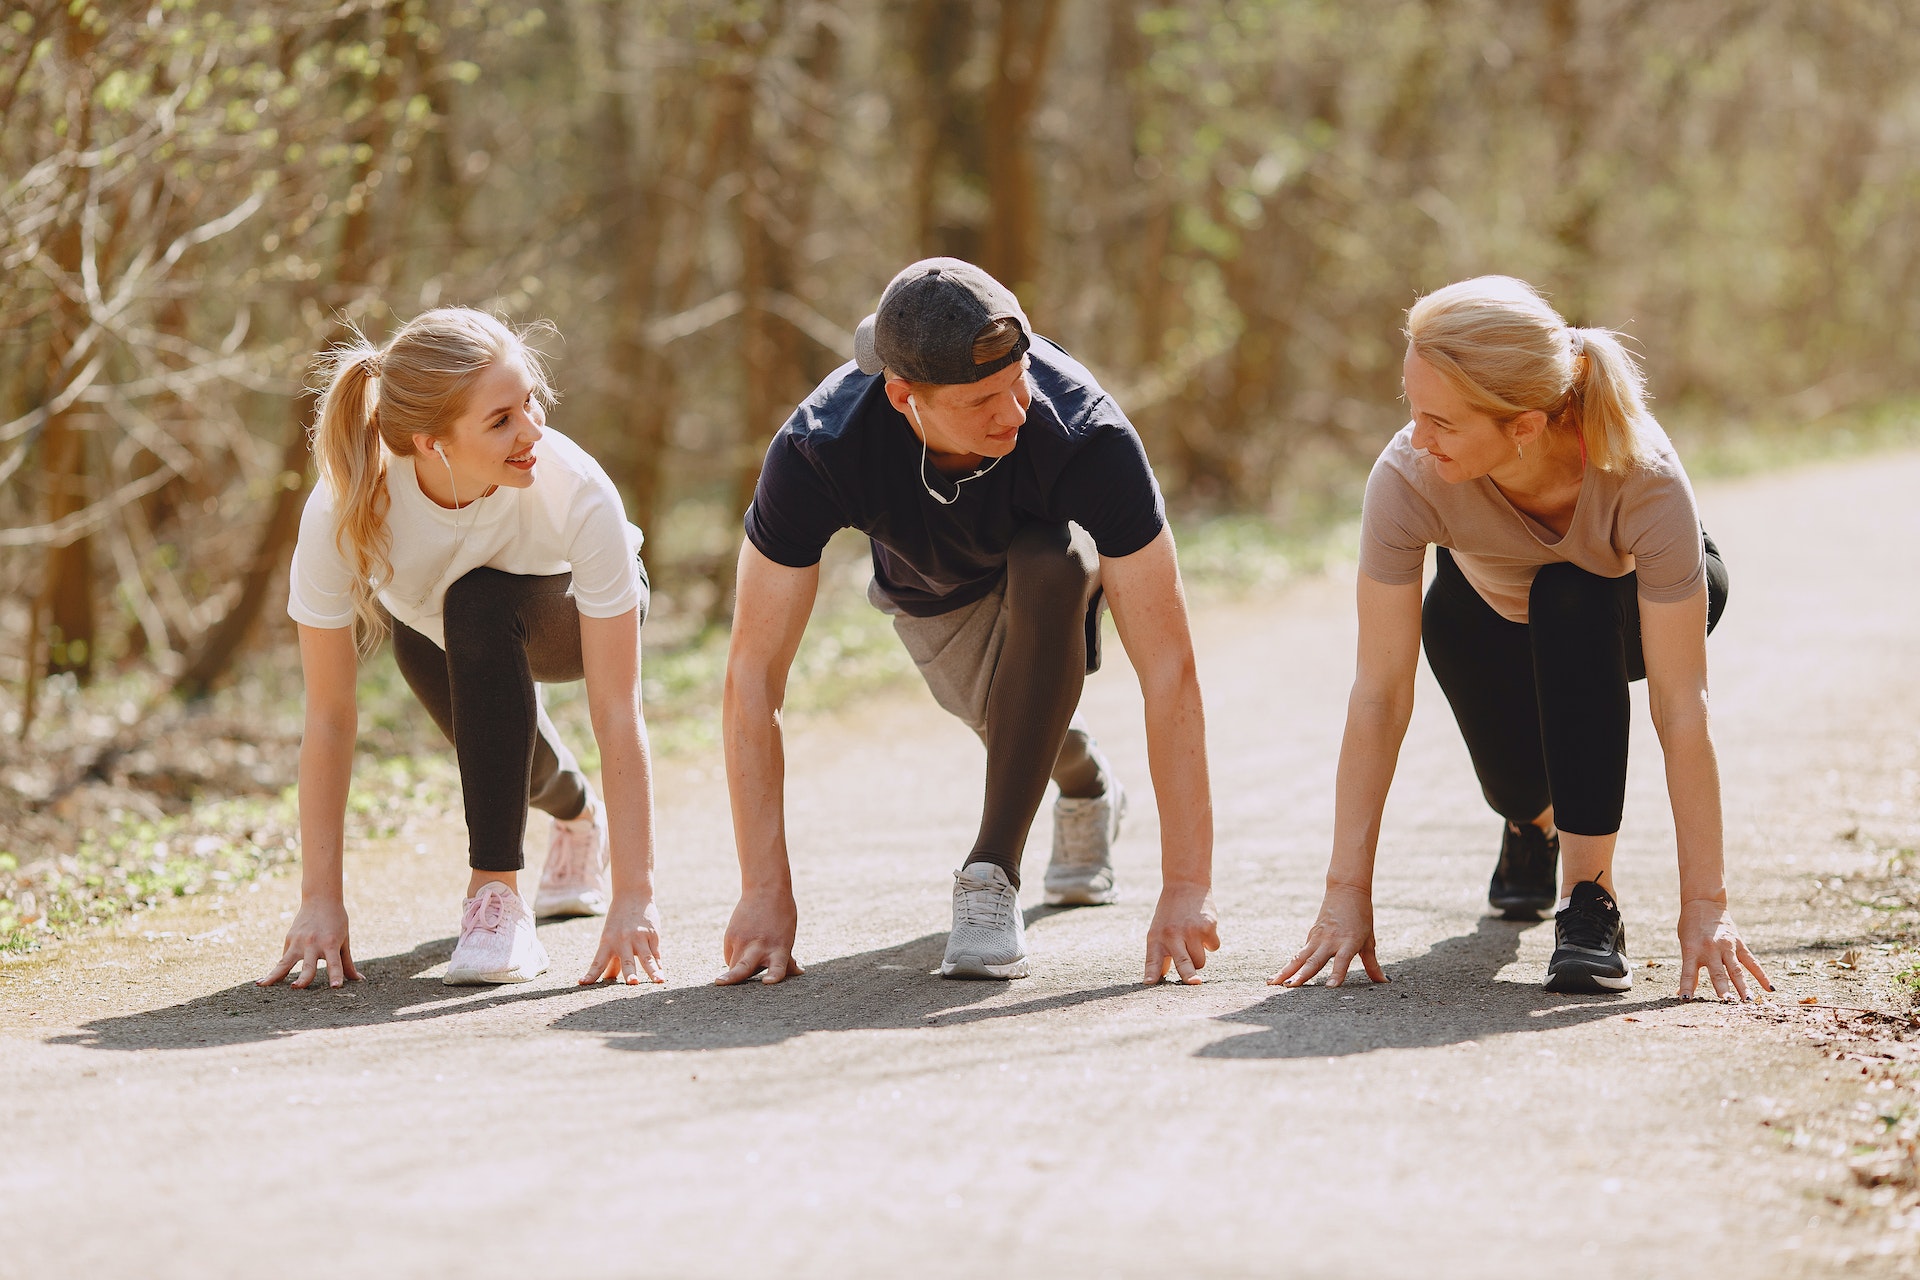 Three people stretching for a run in the park